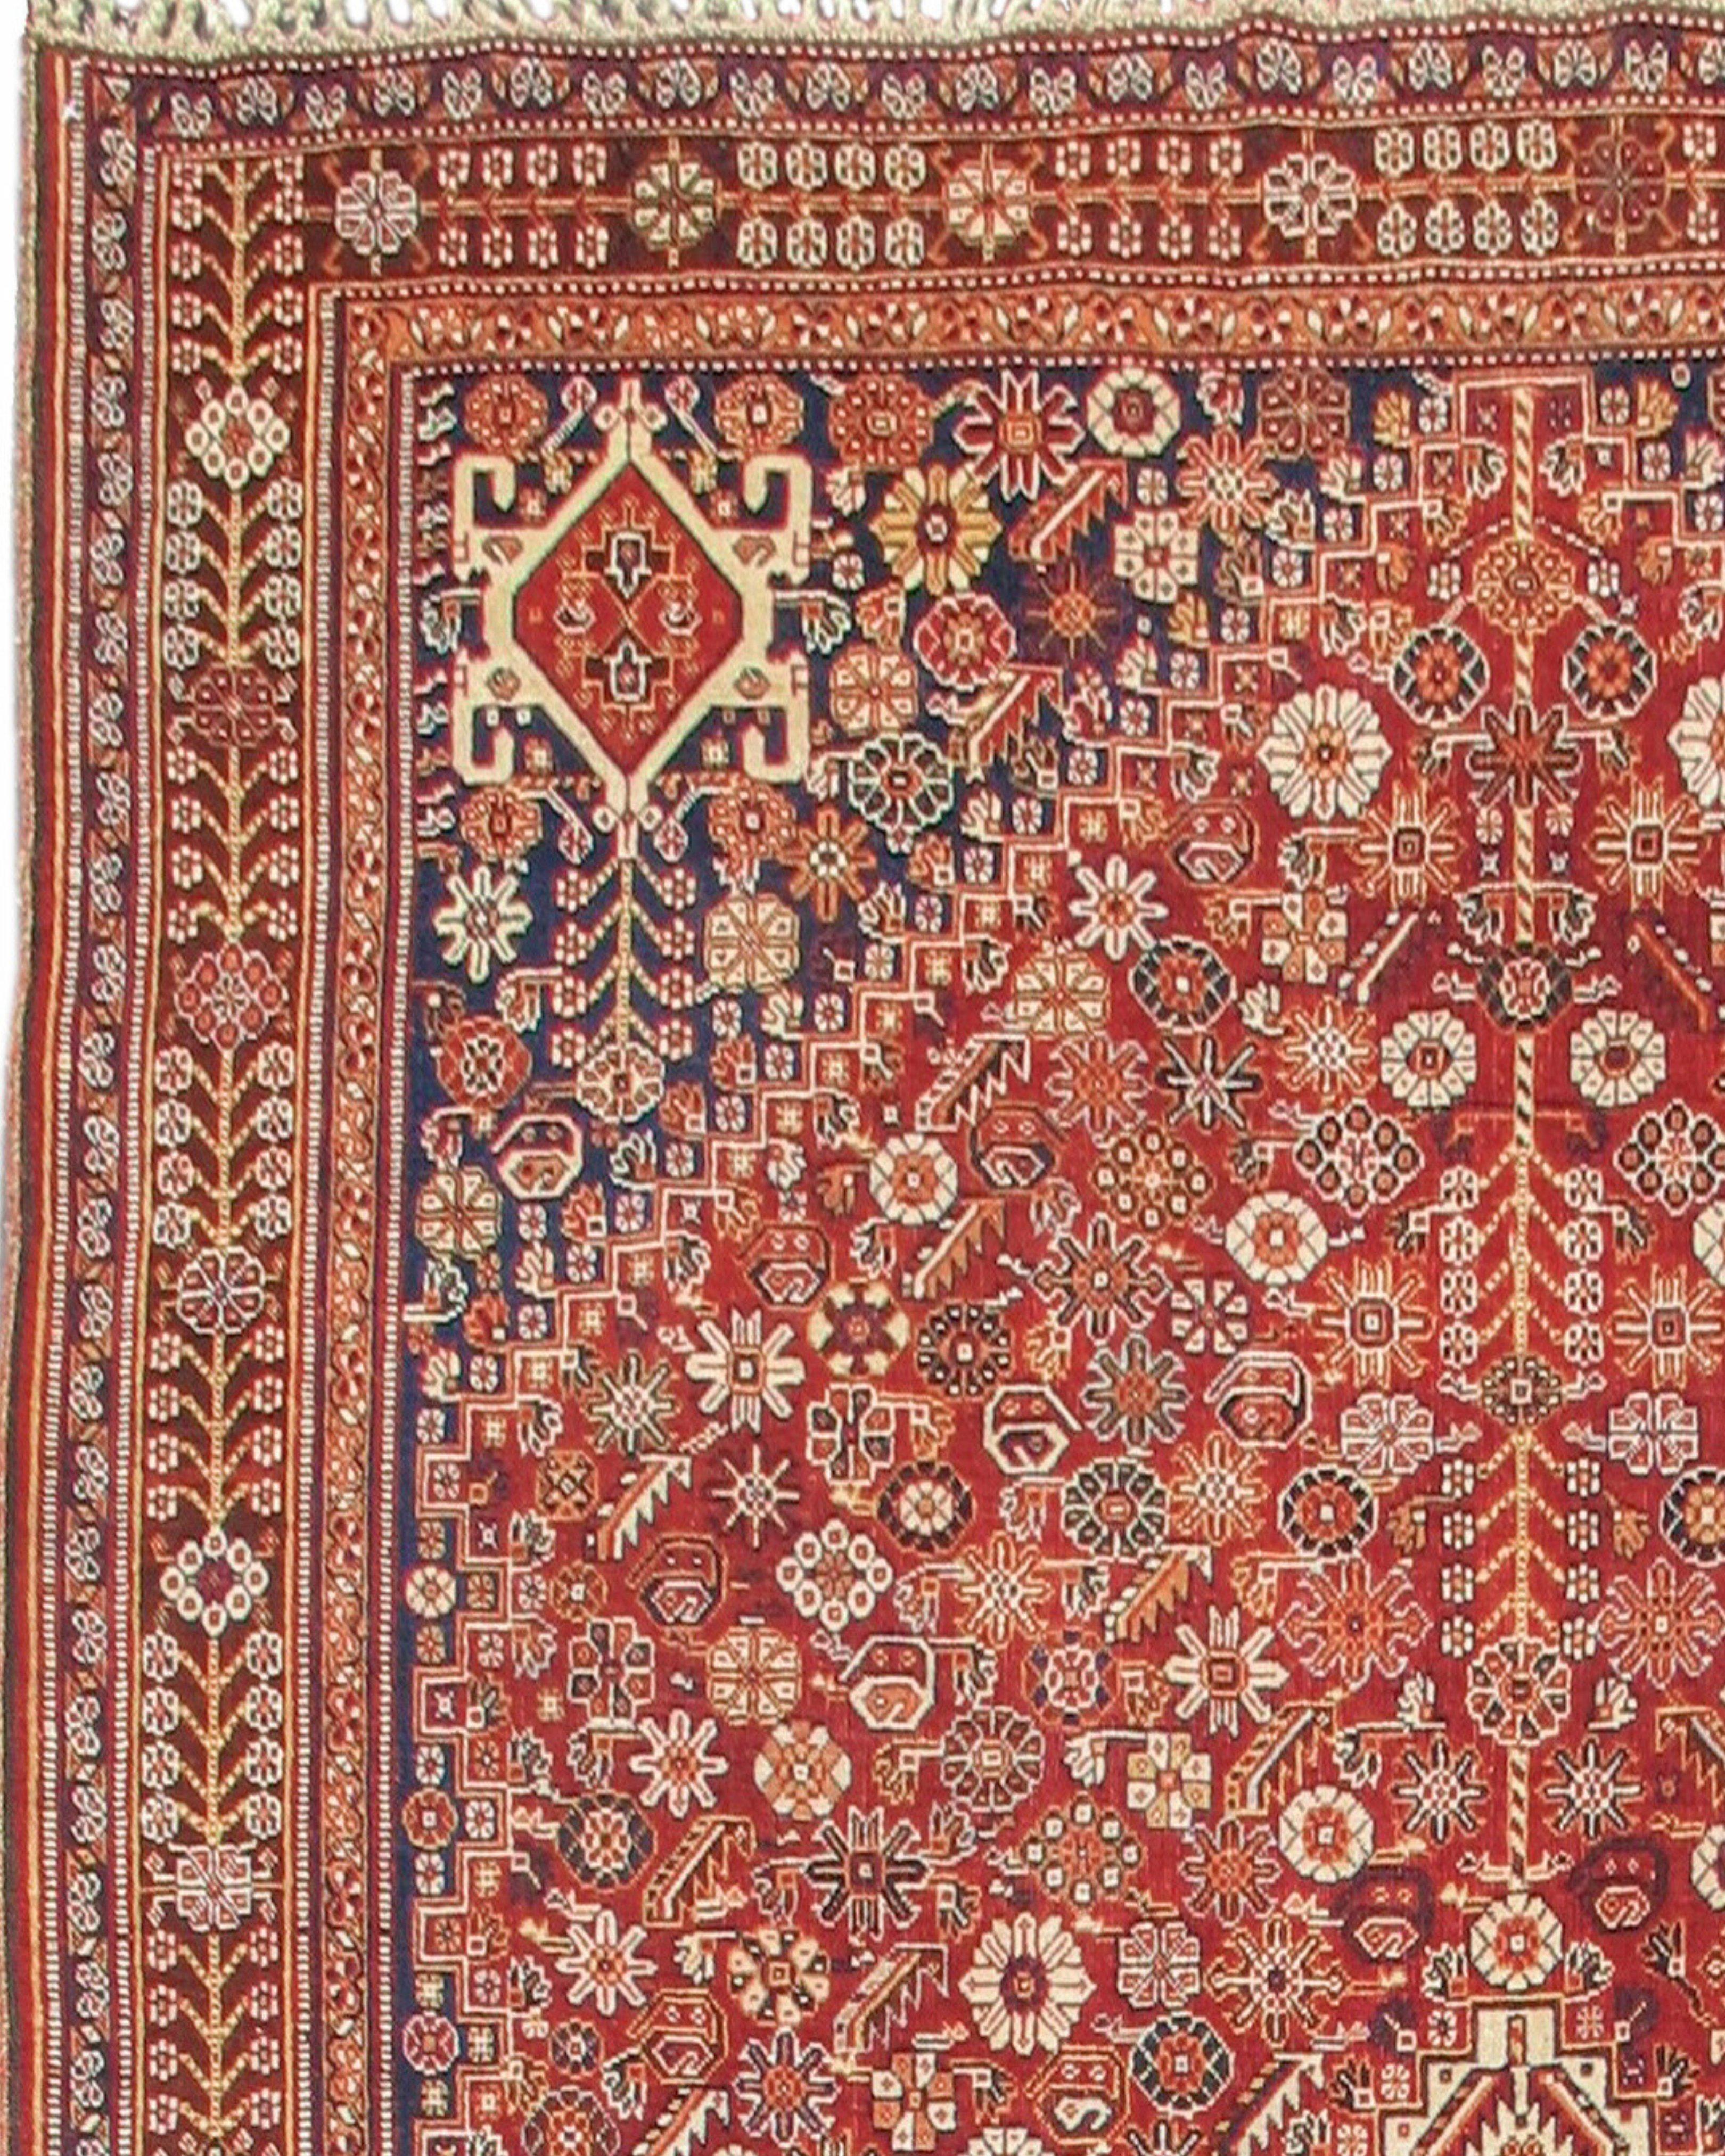 Hand-Knotted Antique Persian Qashqai Rug, c. 1900 For Sale